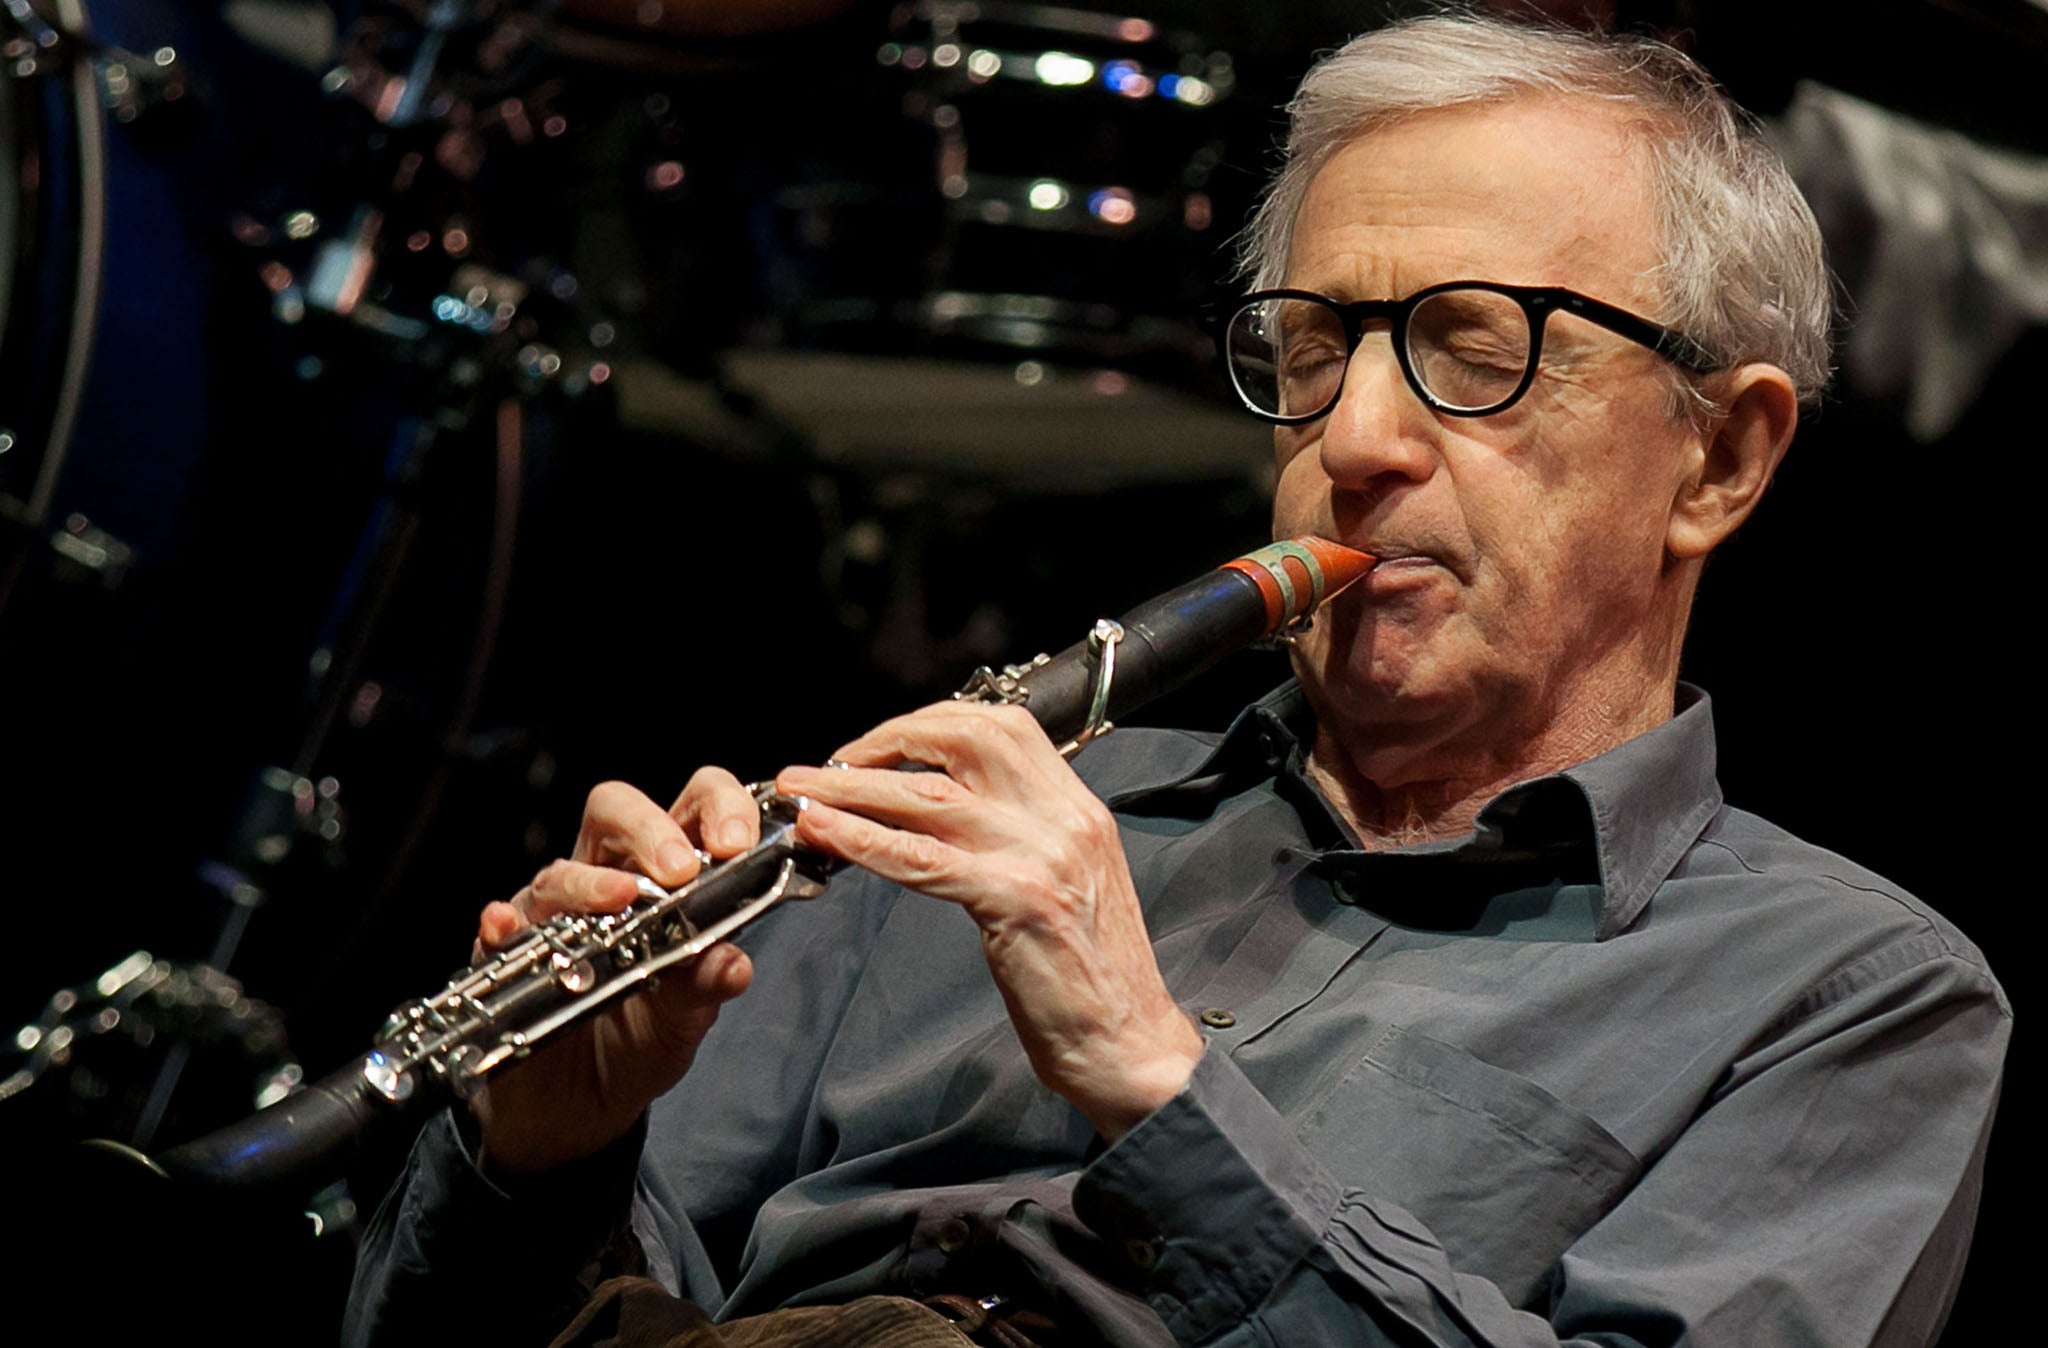 Woody Allen is a regular performer on the New York jazz scene. Here, he plays the clarinet at a club in December 2013.